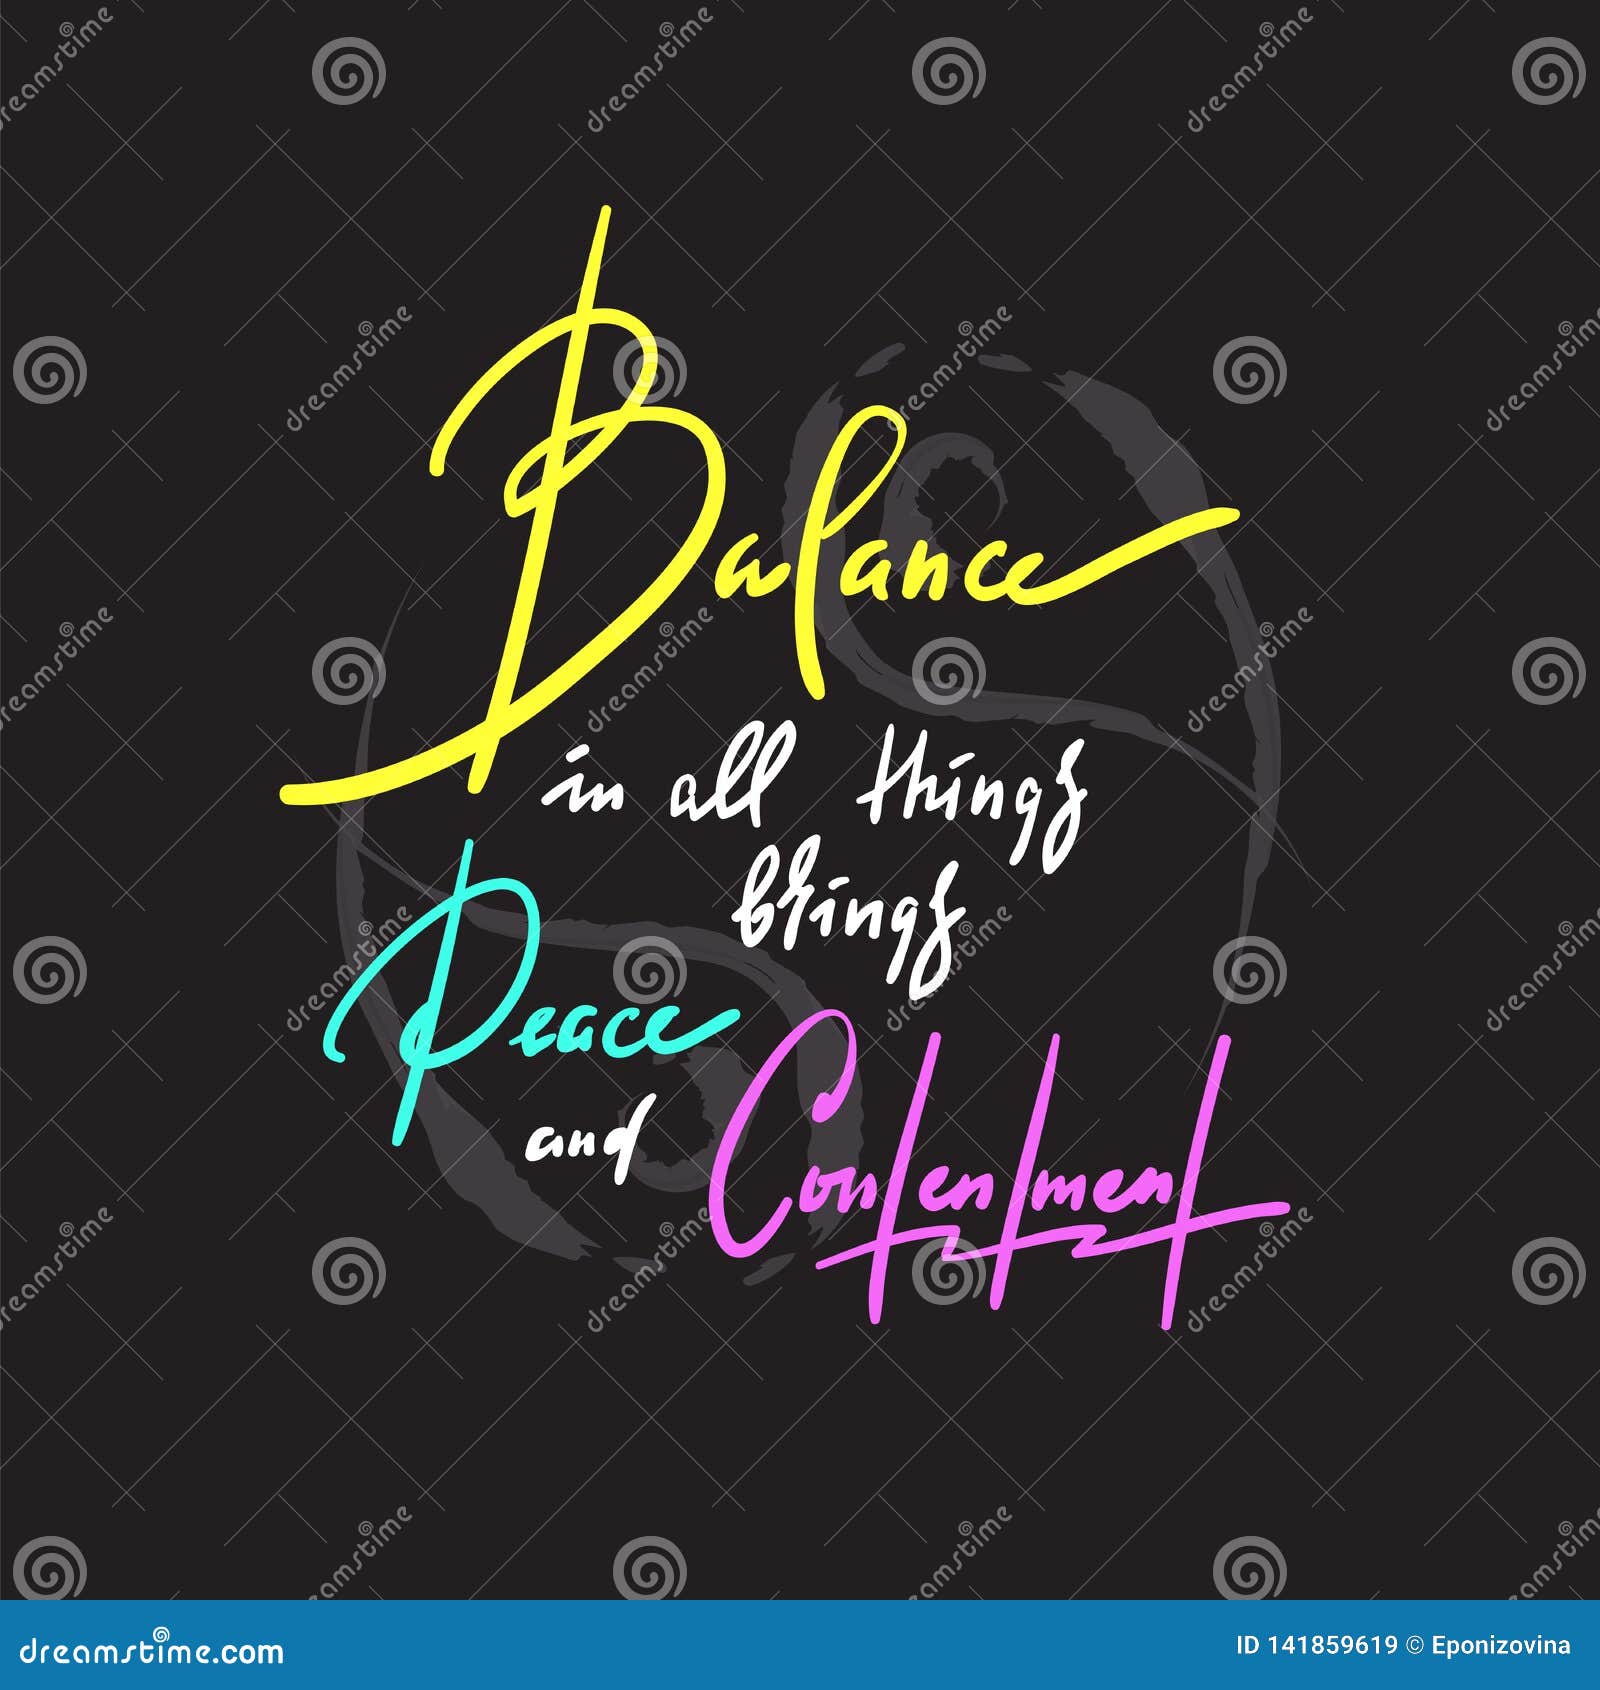 balance in all things brings peace and contentment - inspire motivational quote. hand drawn